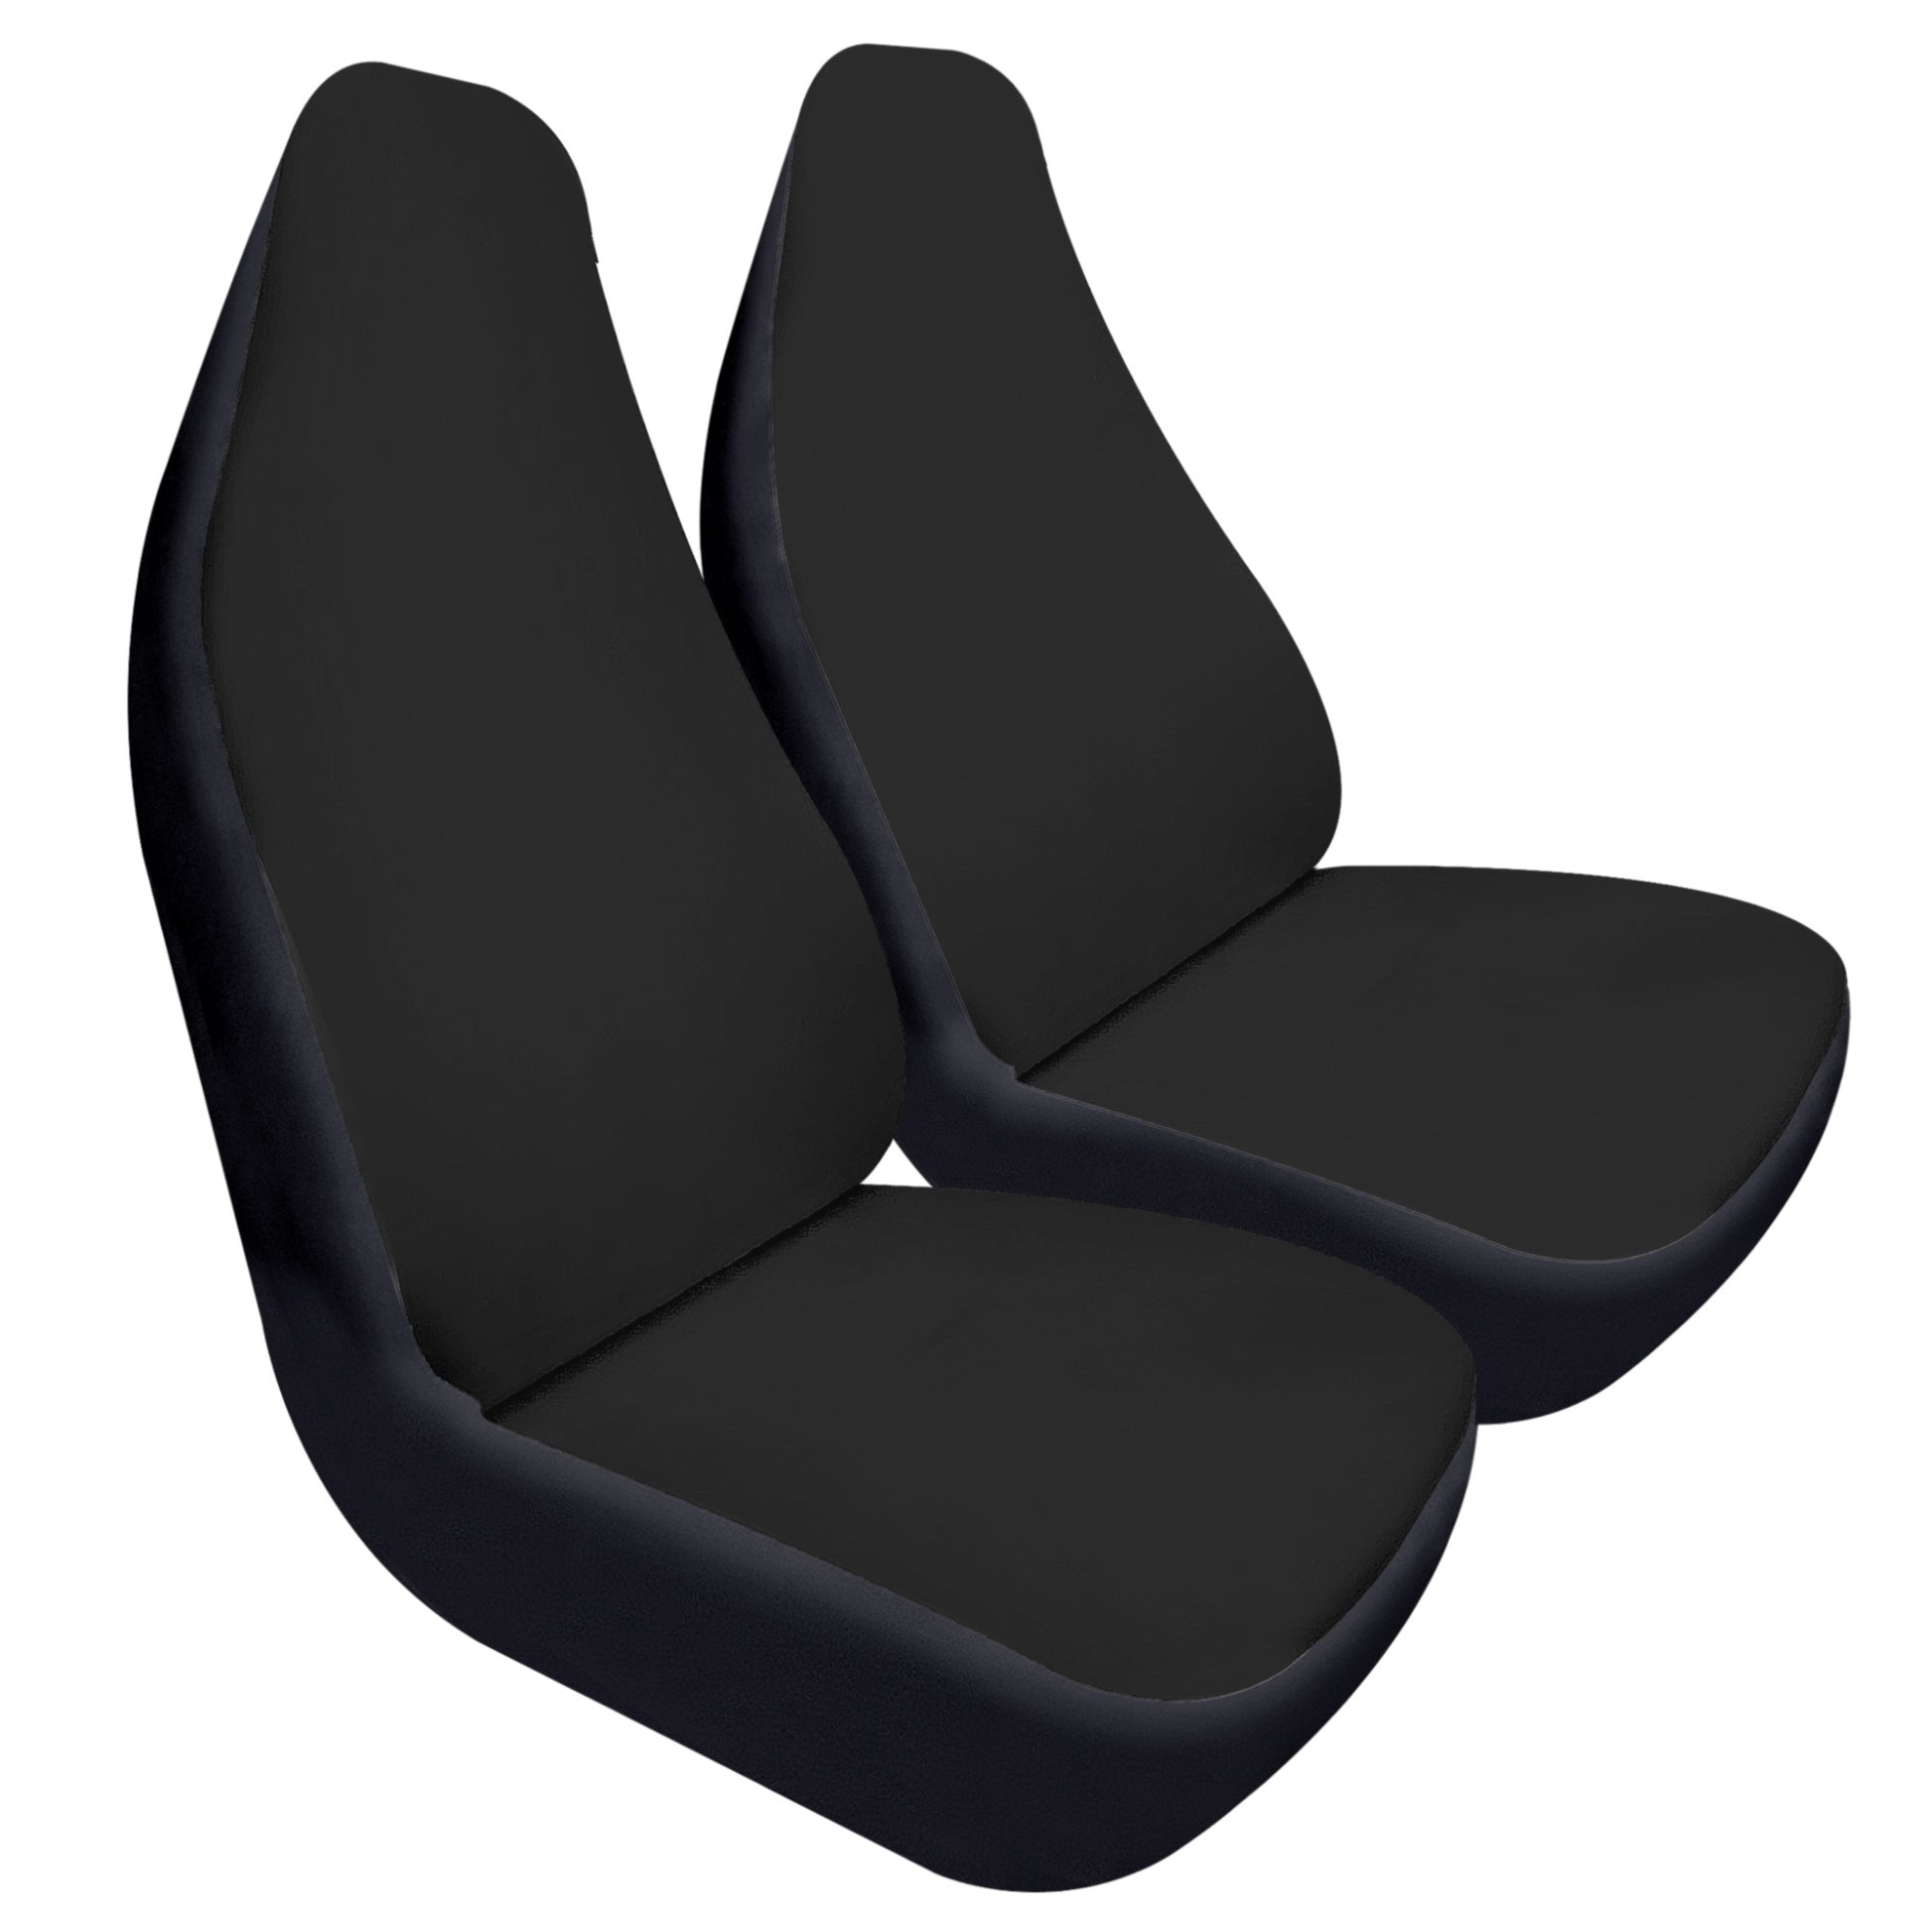 ShitHot Customizable Front Car Seat Covers - Black